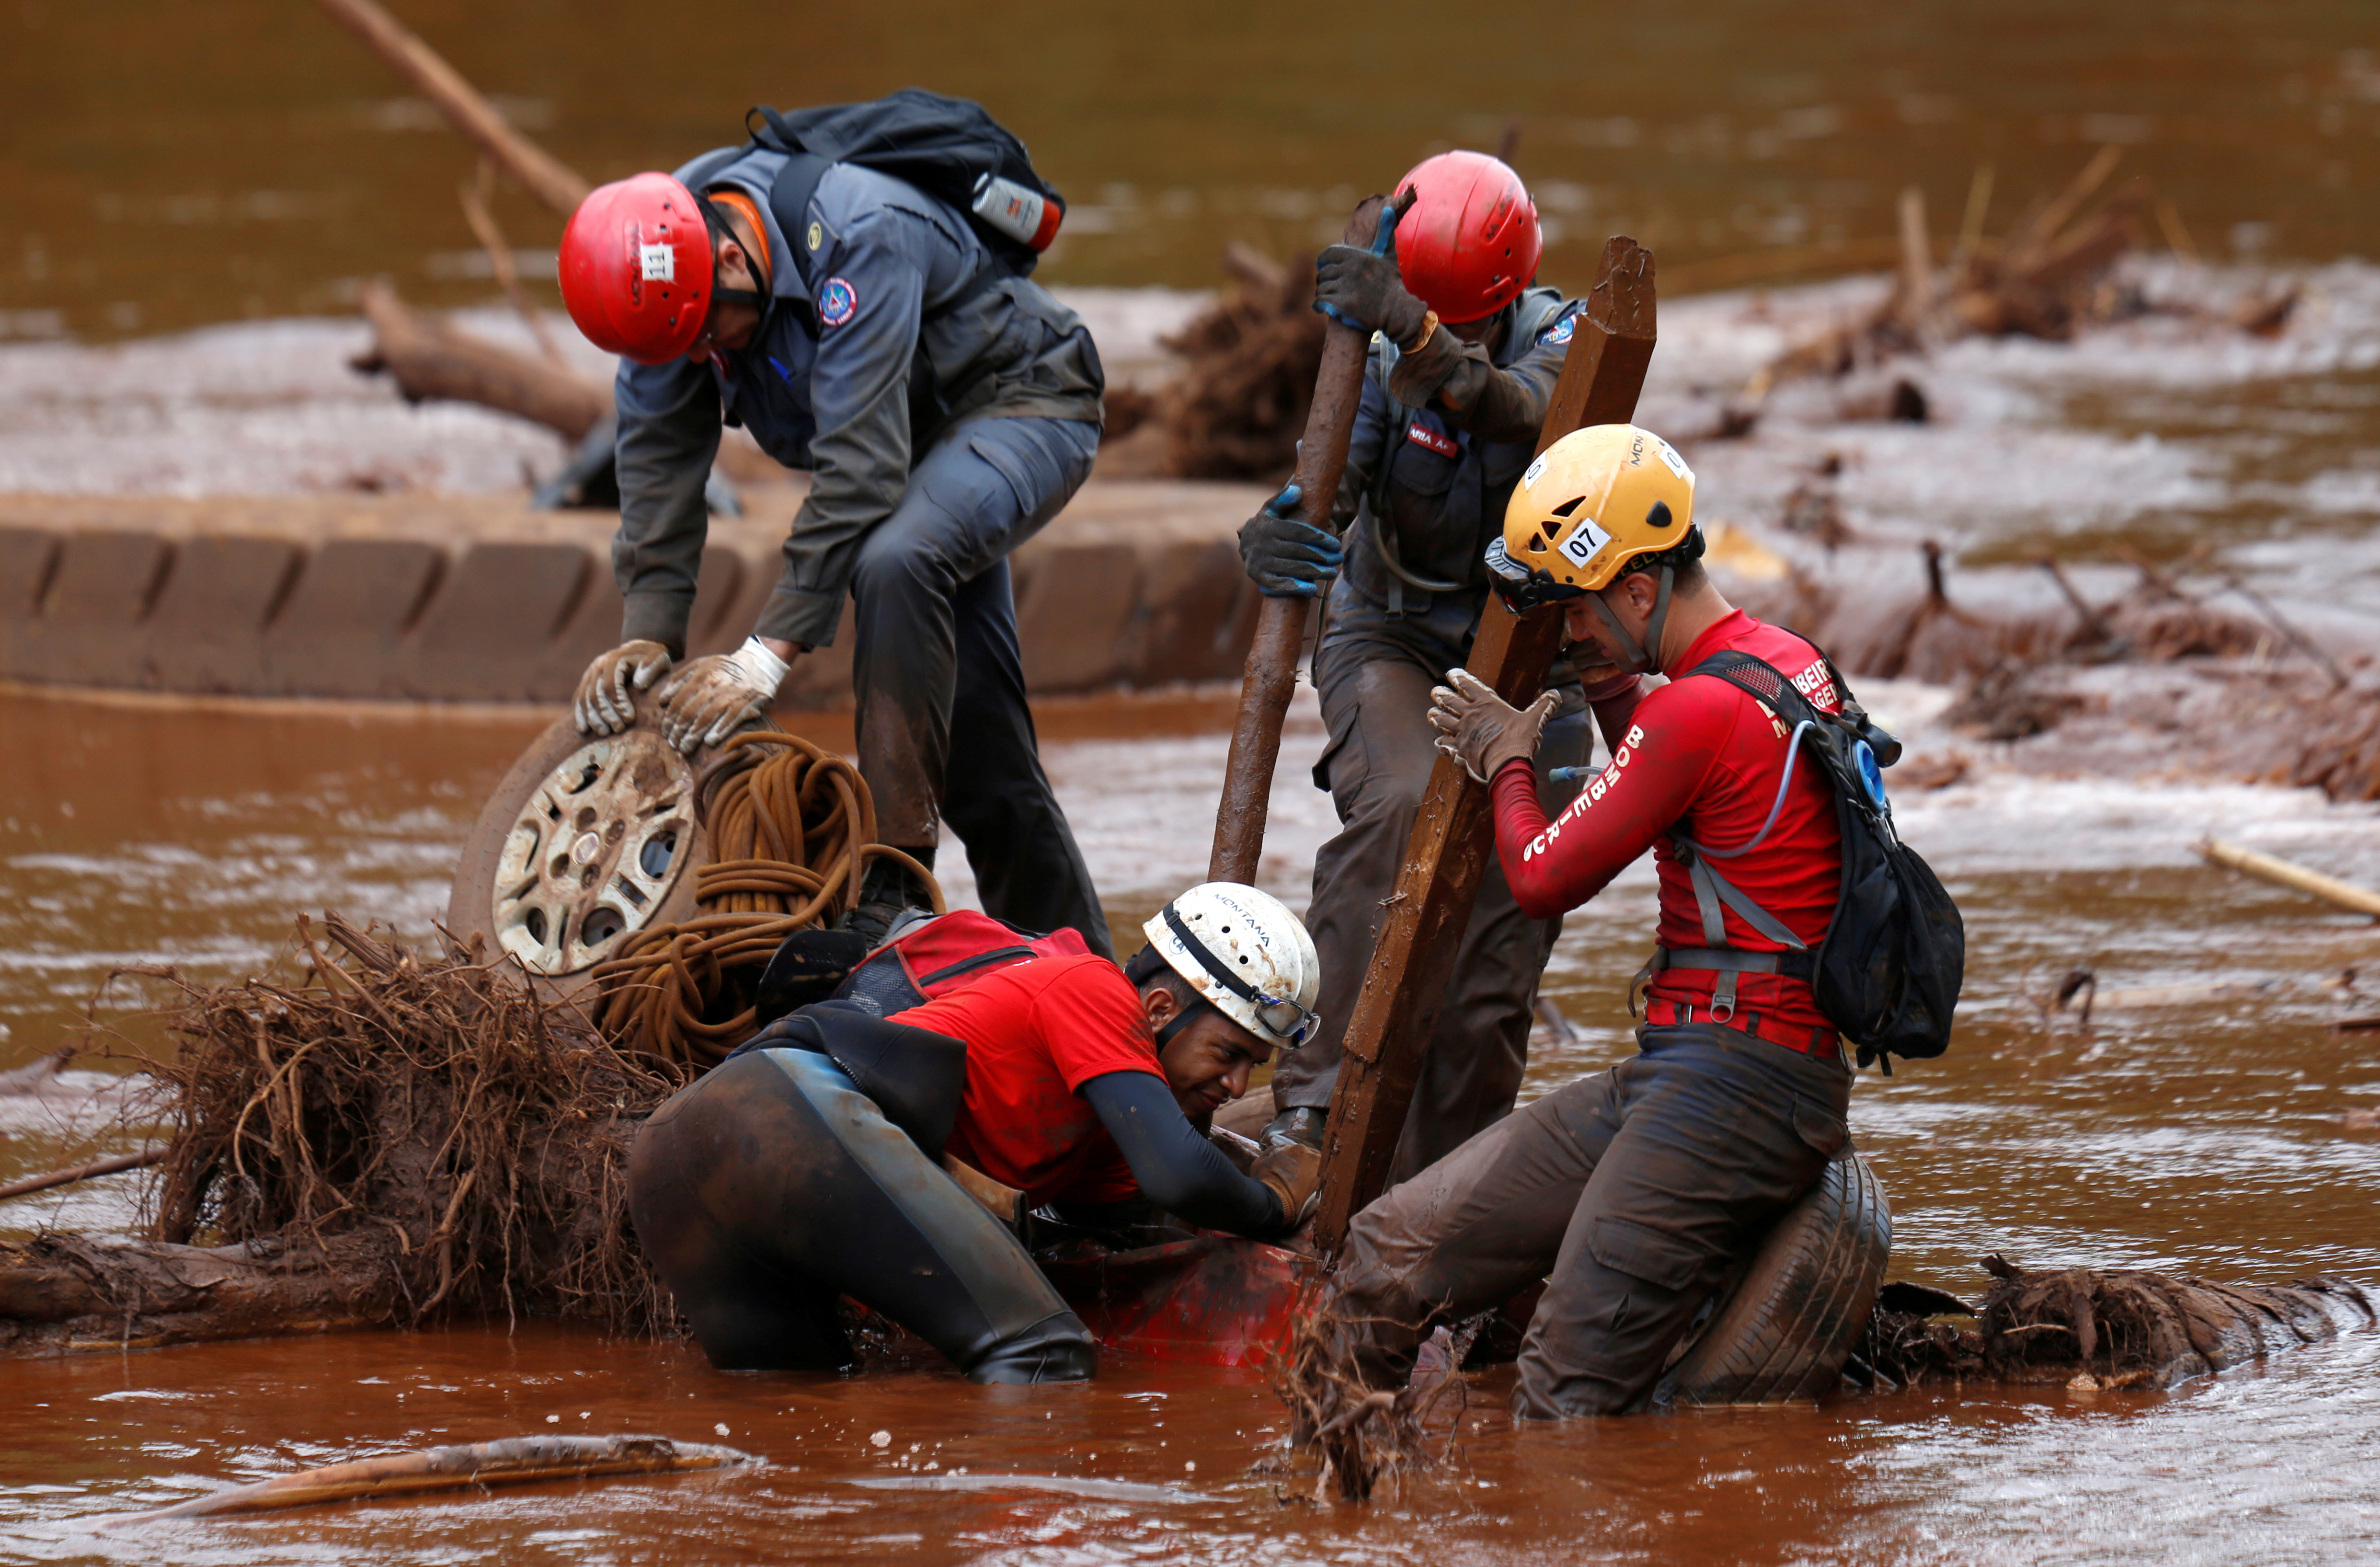 Members of a rescue team search for victims of a collapsed tailings dam owned by Brazilian mining company Vale SA in a vehicle on Paraopeba River, in Brumadinho